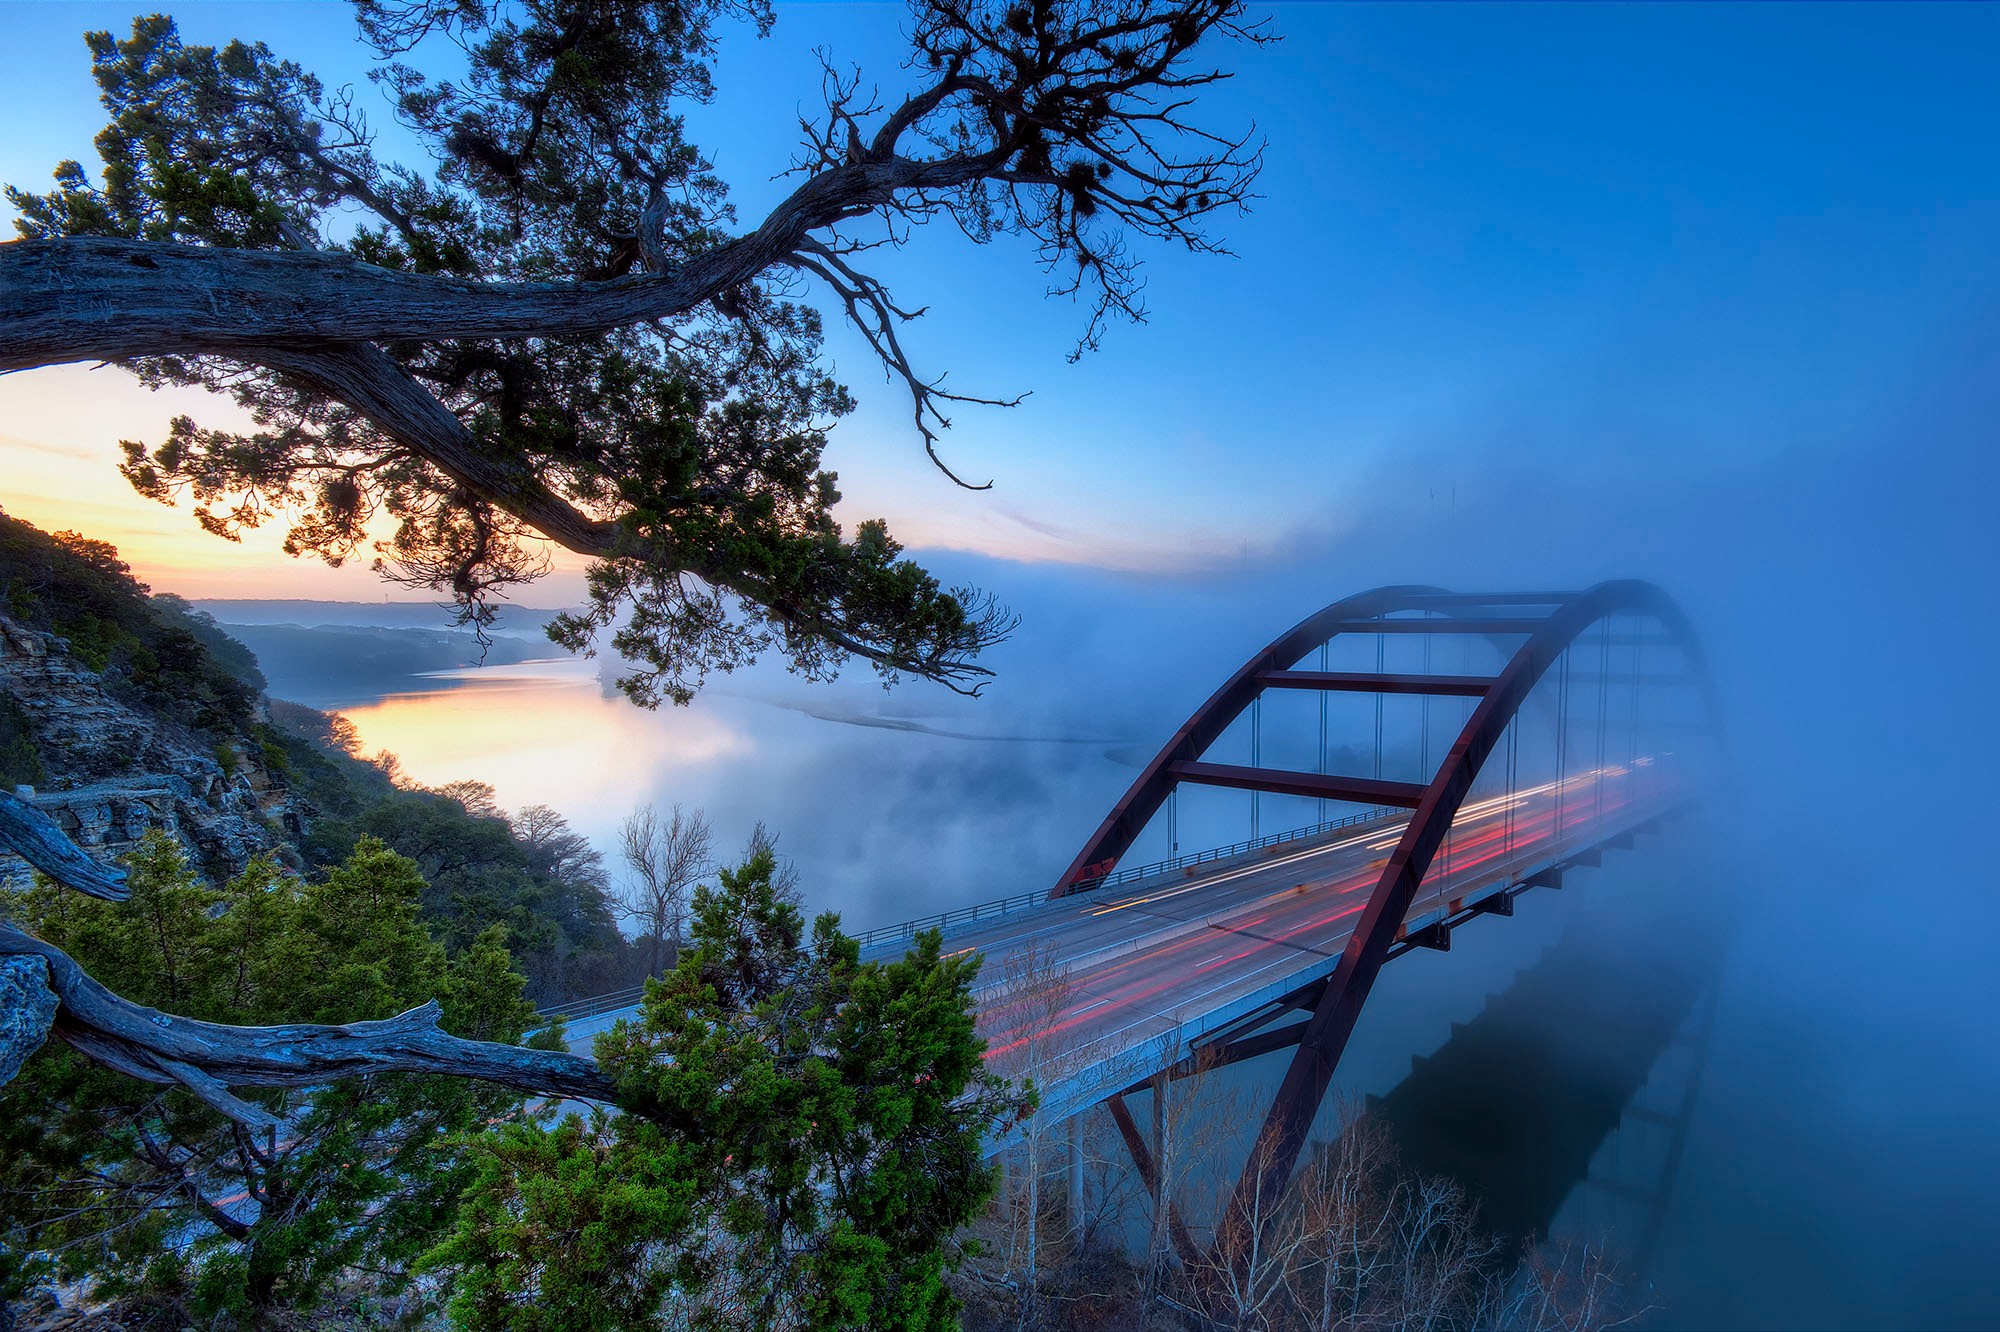 Pennybacker bridge in Texas partially covered by fog